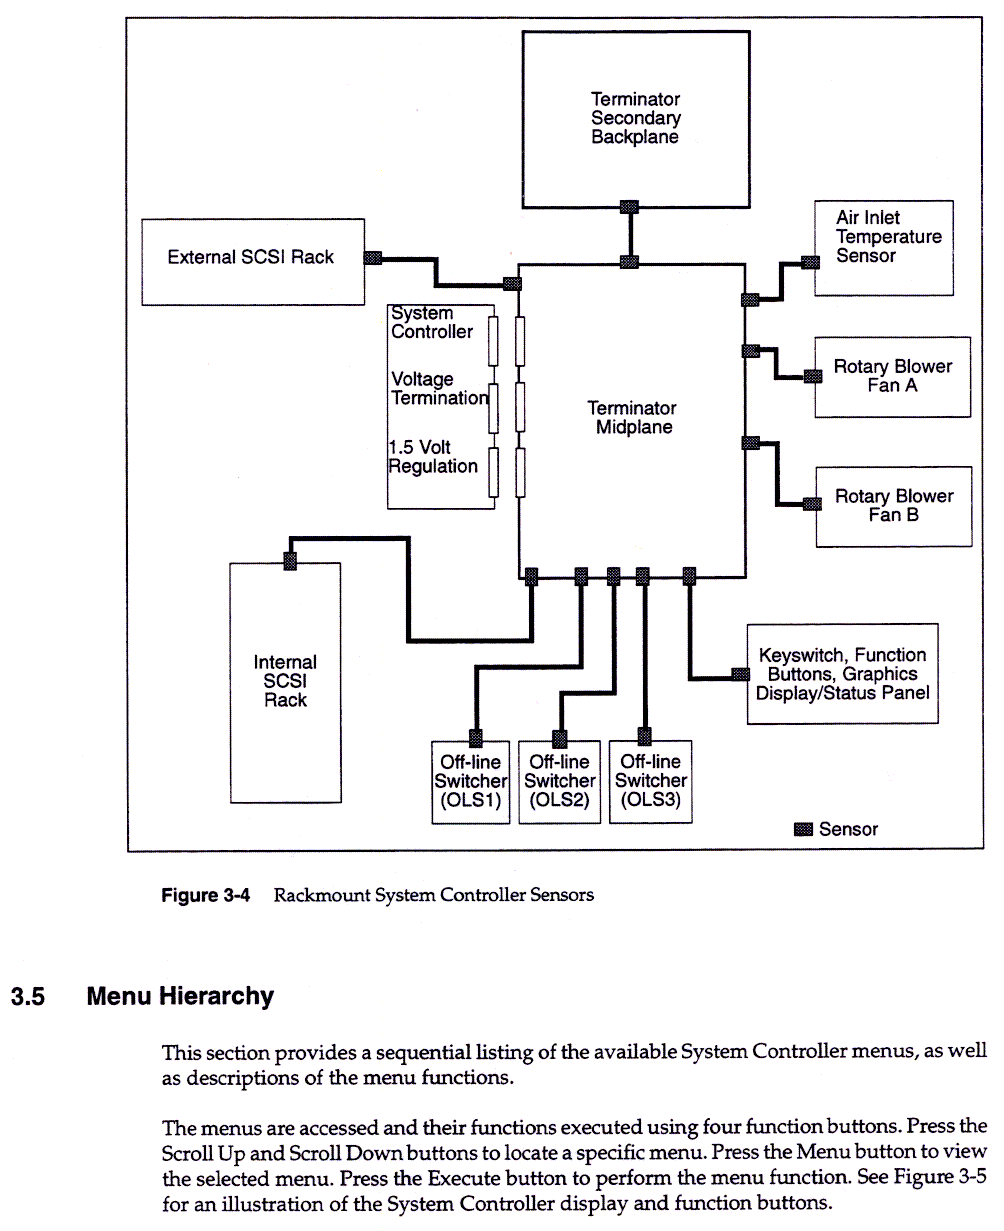 System Controller, 3-11